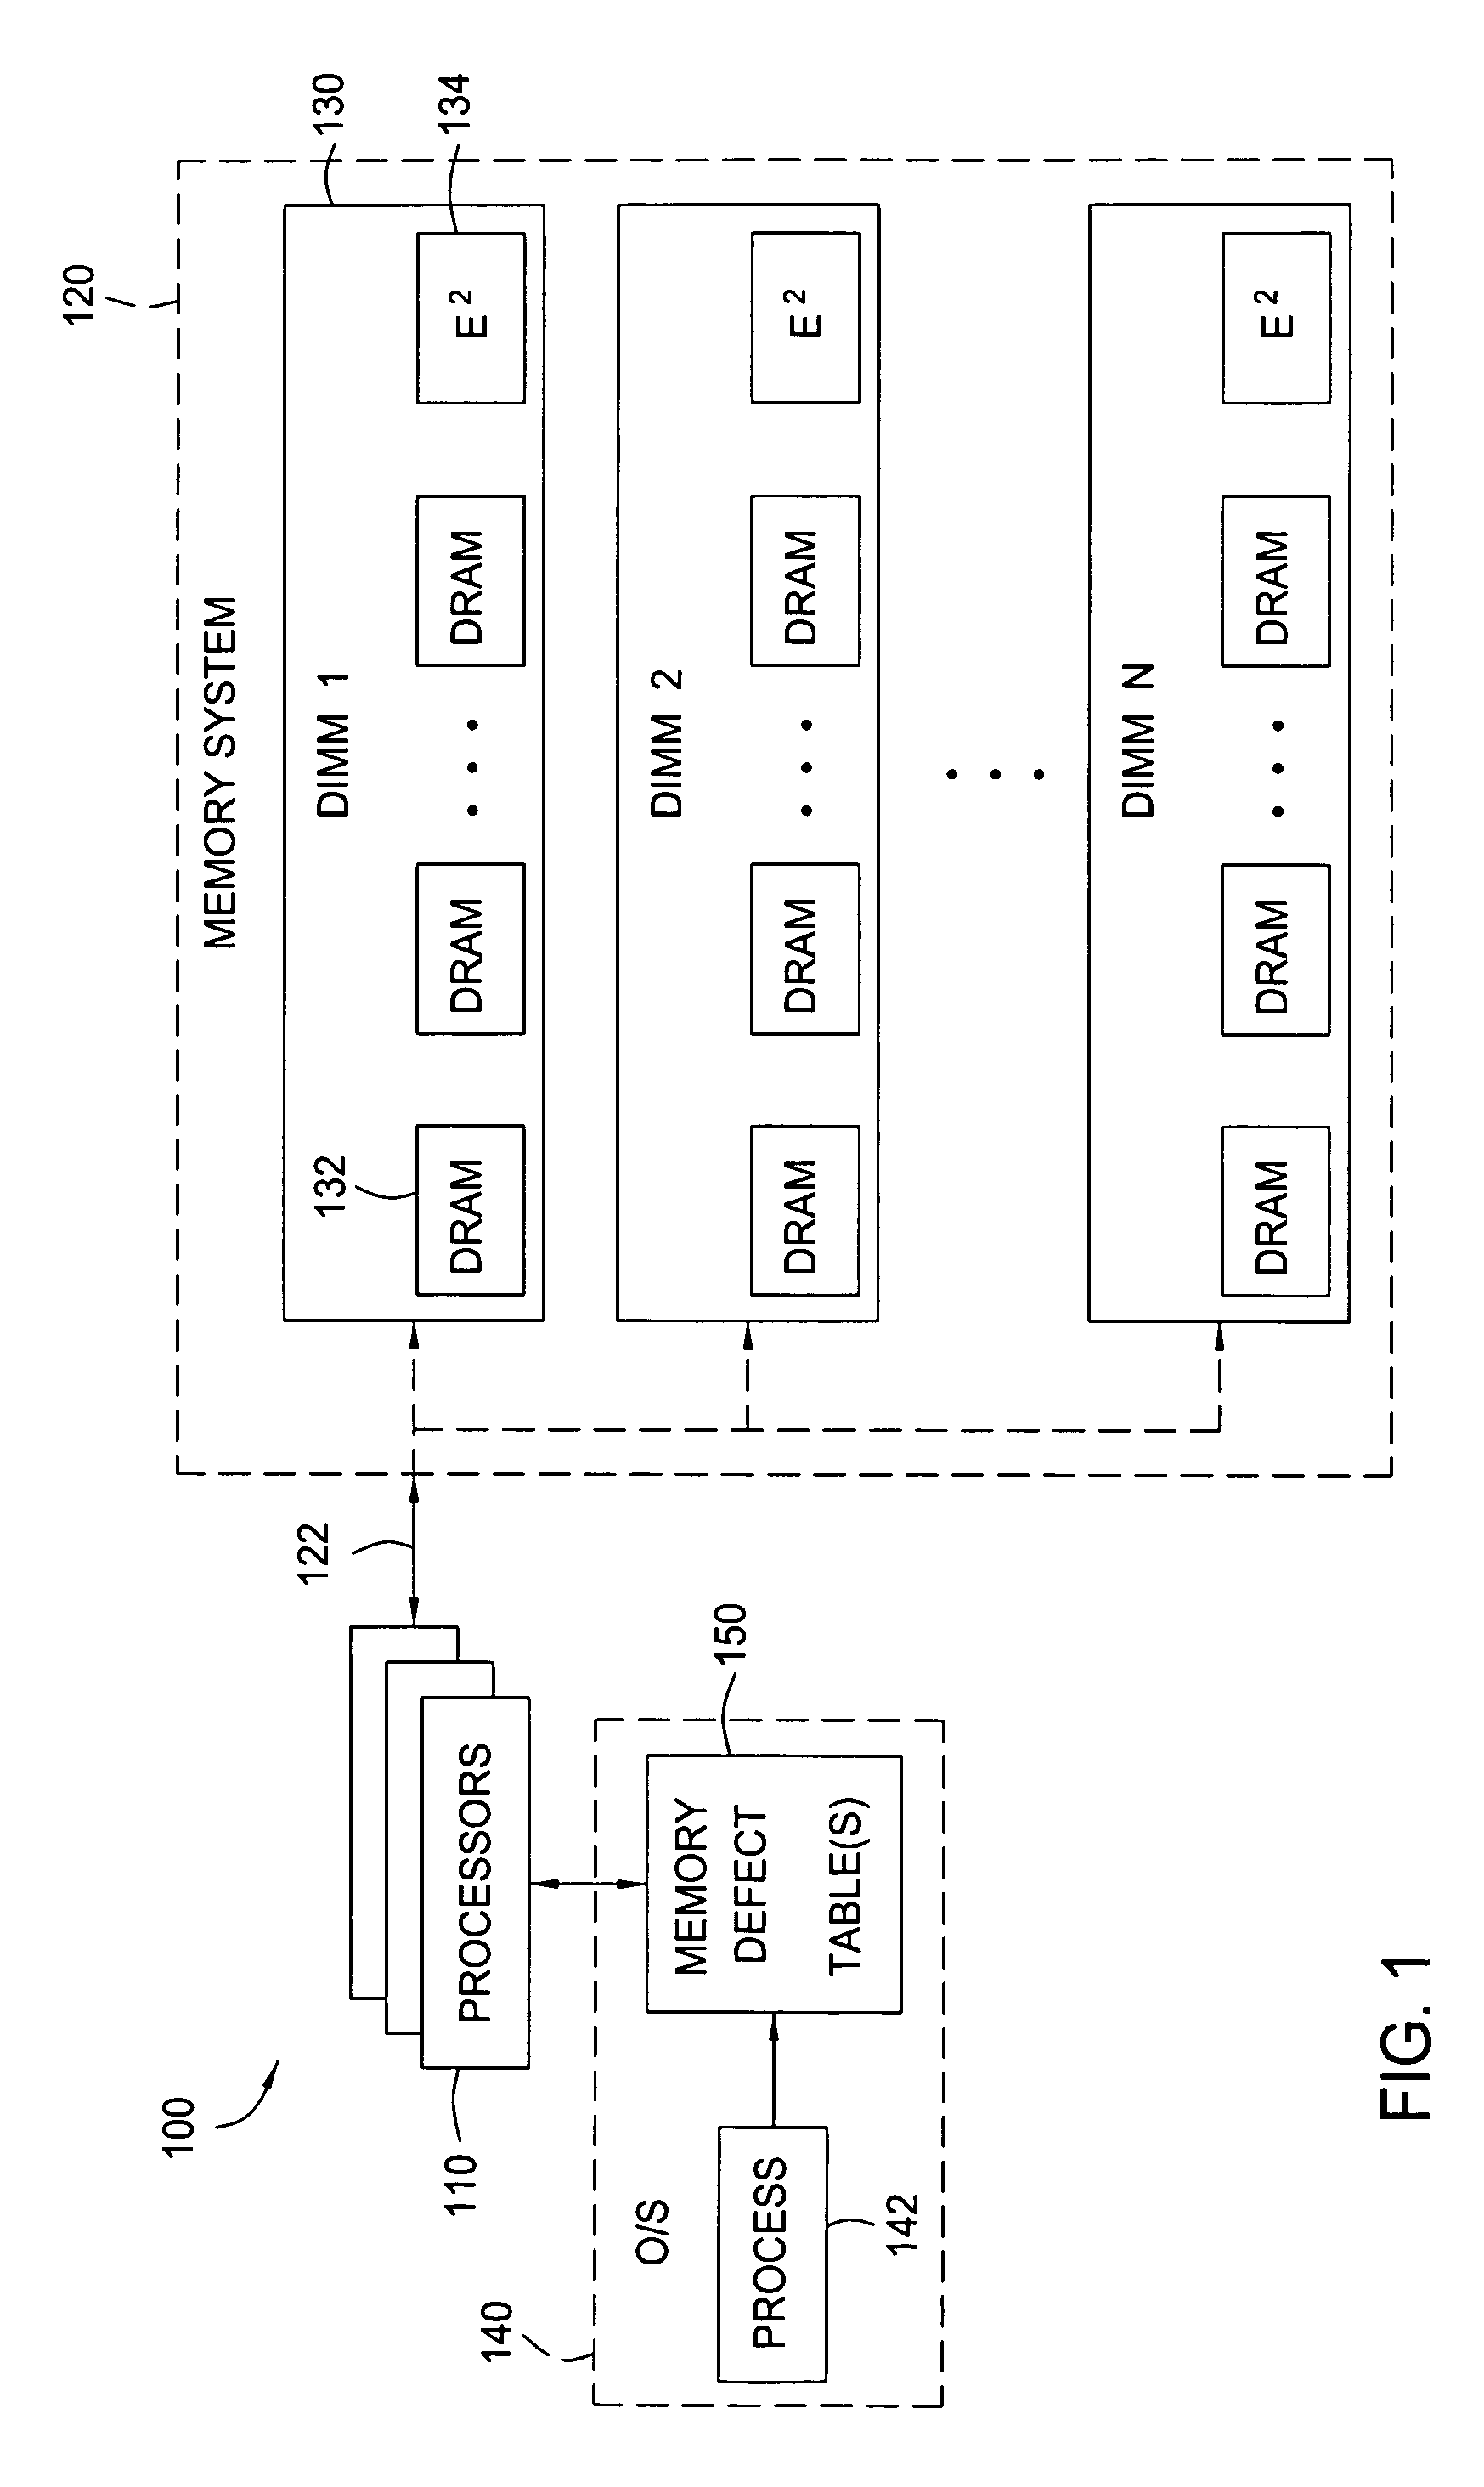 Generation and use of system level defect tables for main memory